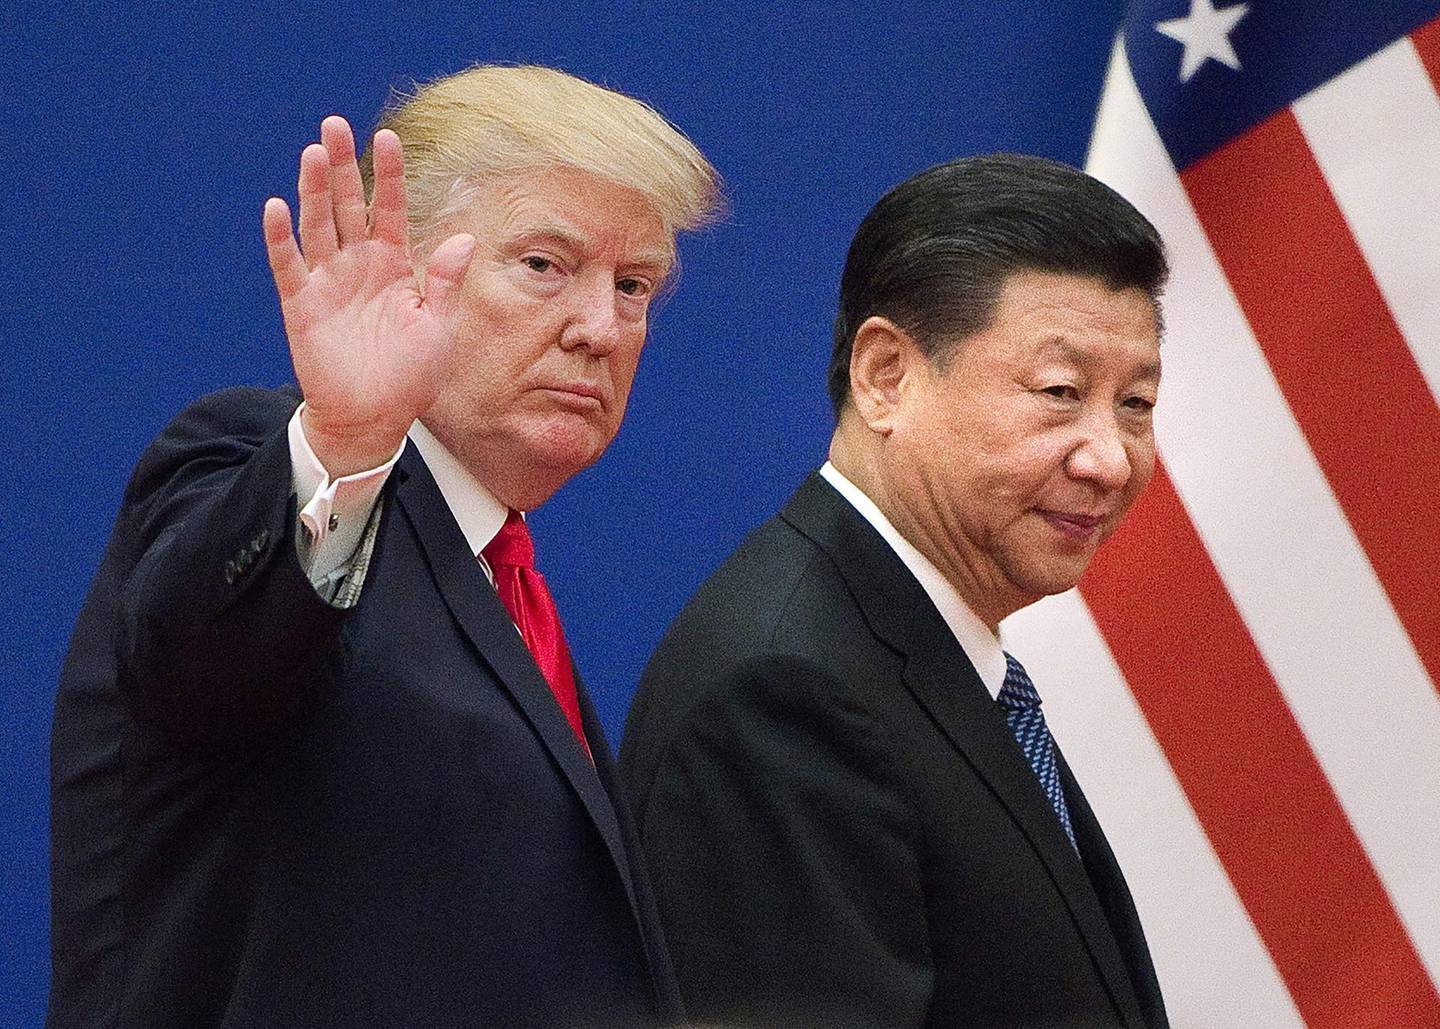 (FILES) This file picture taken on November 9, 2017, shows US President Donald Trump (L) and China's President Xi Jinping leaving a business leaders event at the Great Hall of the People in Beijing.  Trump said on December 7, 2018, the negotiations to defuse the trade conflict with China are "going very well." Trump met Xi during the G-20 summit in Buenos Aires and agreed to a 90-day tariff truce in order to find a more permanent solution to the costly dispute, but messages since have been mixed, roiling global stock markets. "China talks are going very well!" Trump tweeted. - 
 / AFP / Nicolas ASFOURI
